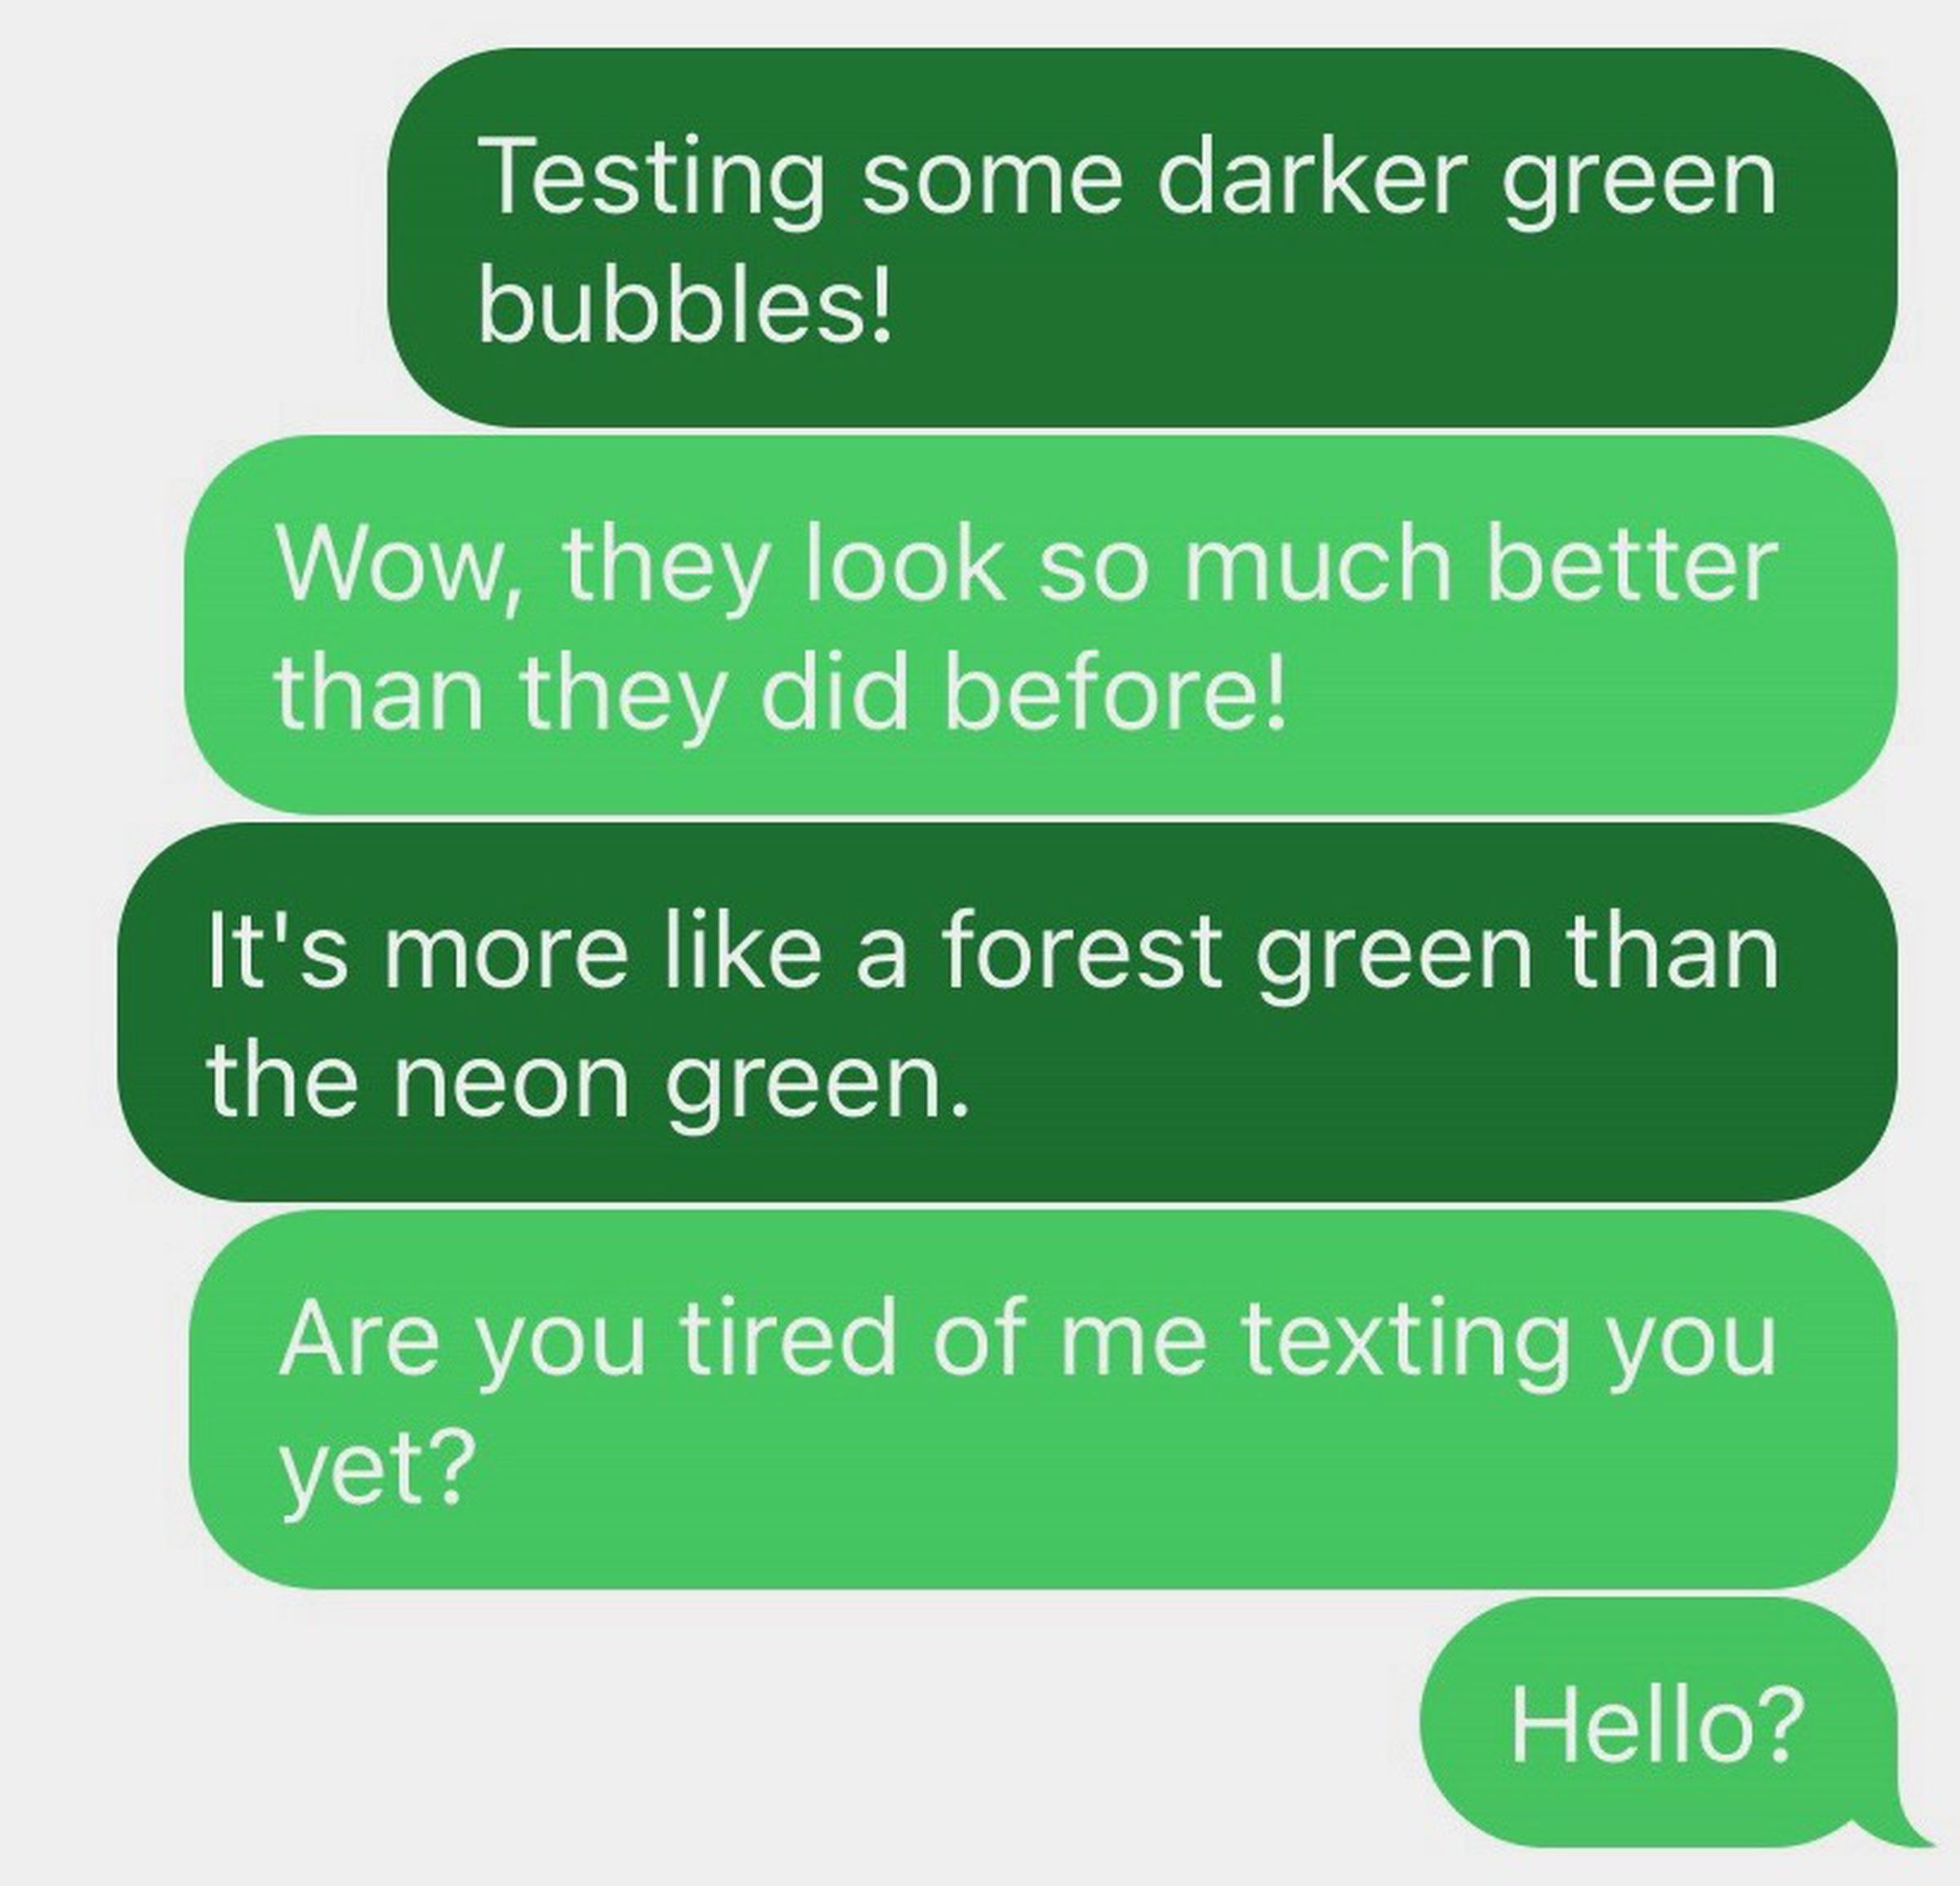 A screenshot of a text conversation on iOS. The text message bubbles show up in two different colors of green.